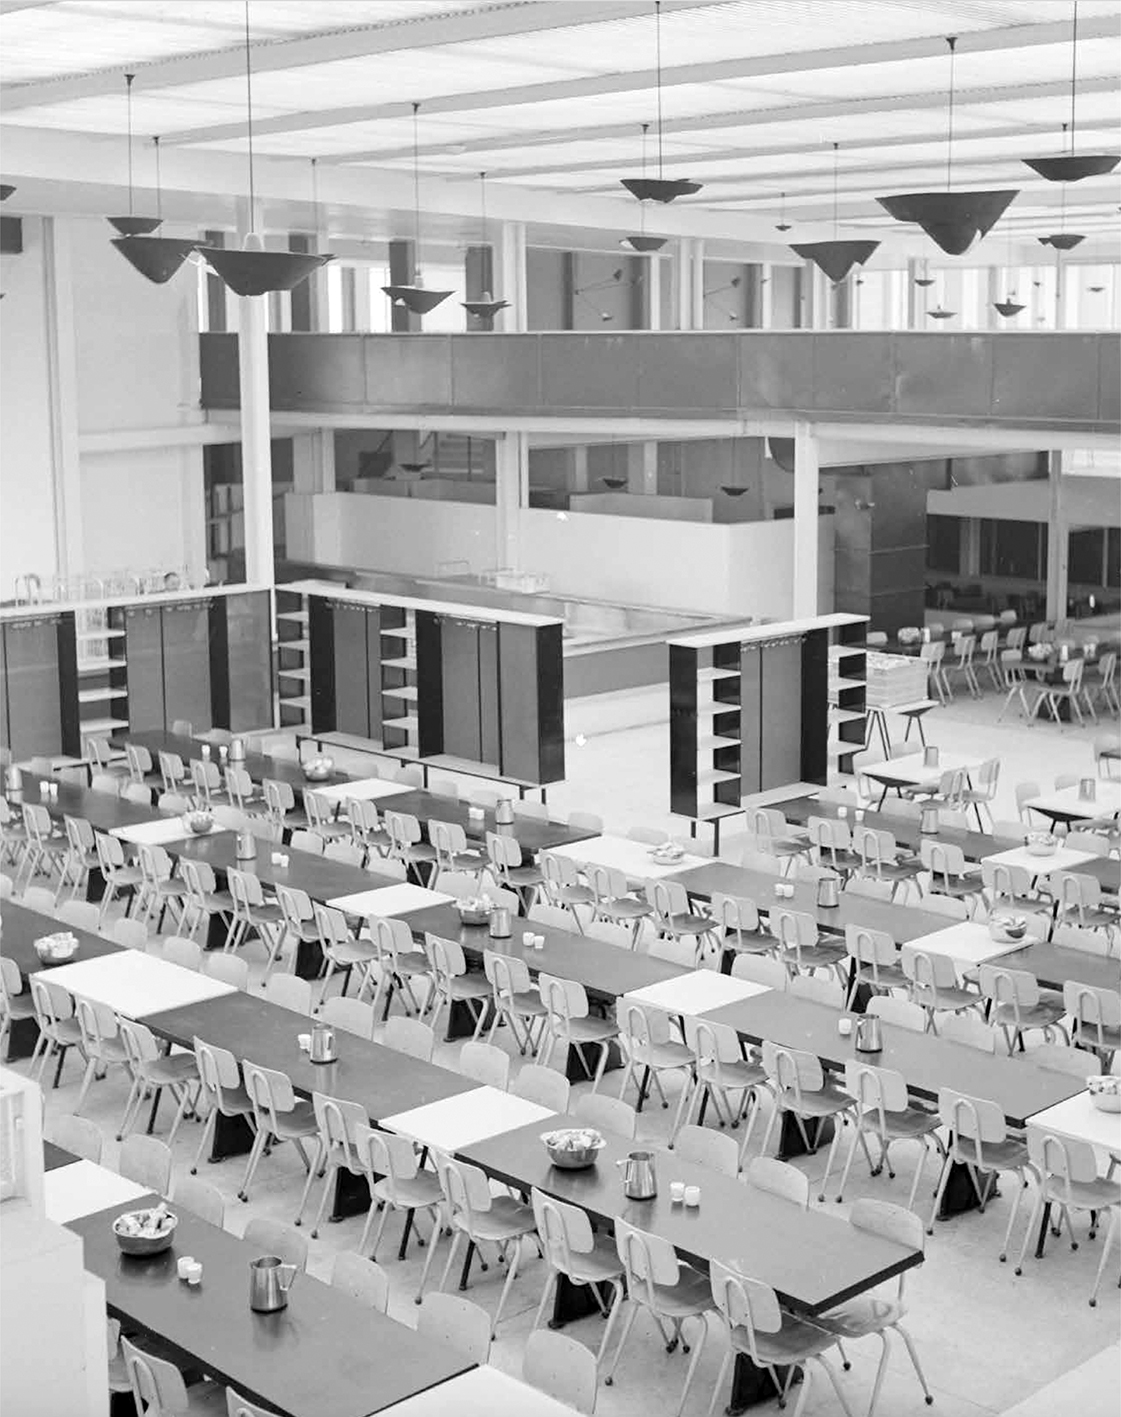 Cité Universitaire, Antony (architects E. Beaudouin and P. Fournier, 1951–1957). The university restaurant fitted out with Centrale and Compas tables, ca. 1956.